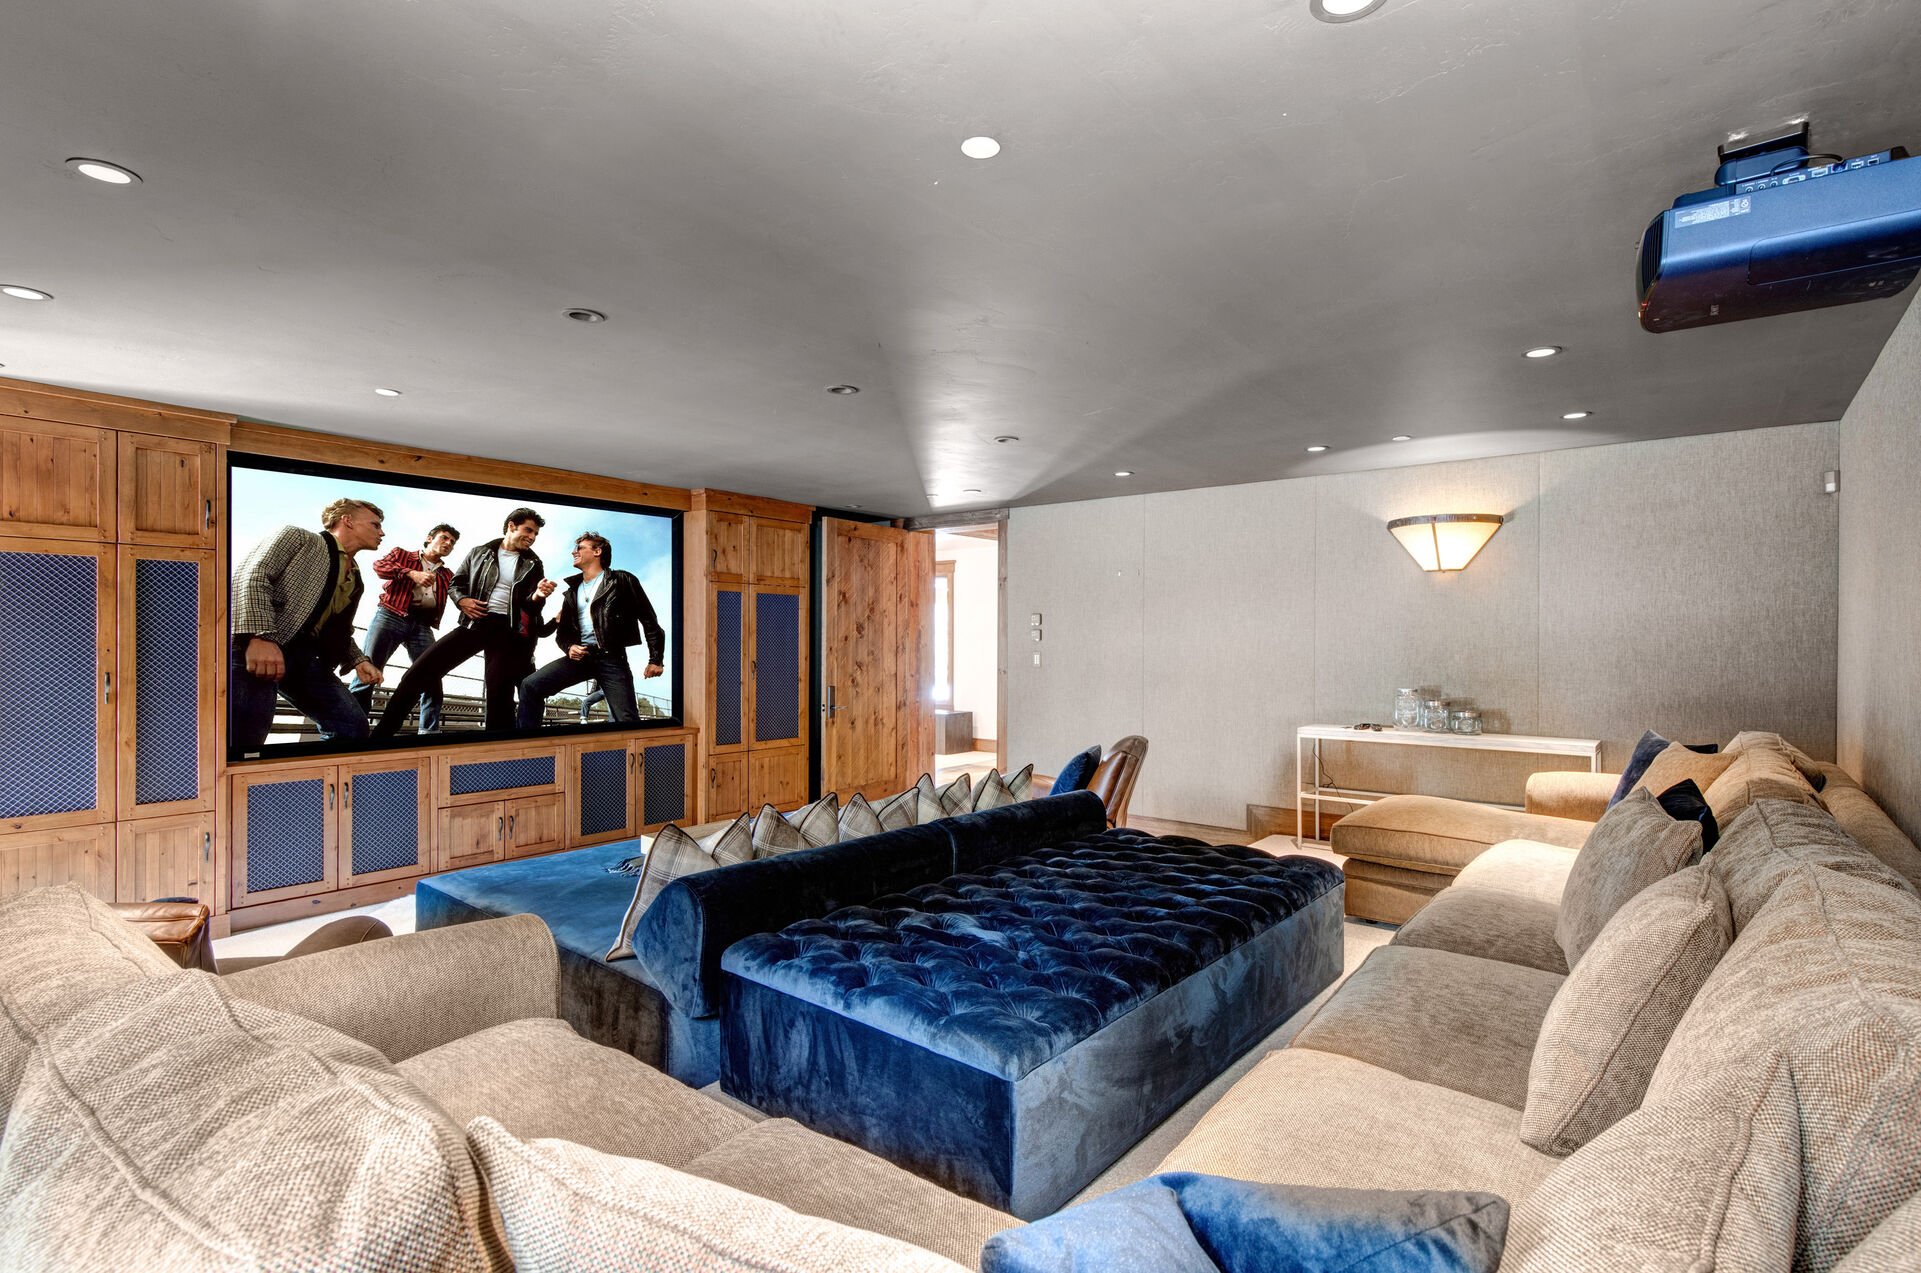 Garage level theater room with large projector, soundproof walls, oversized sectional and sound system